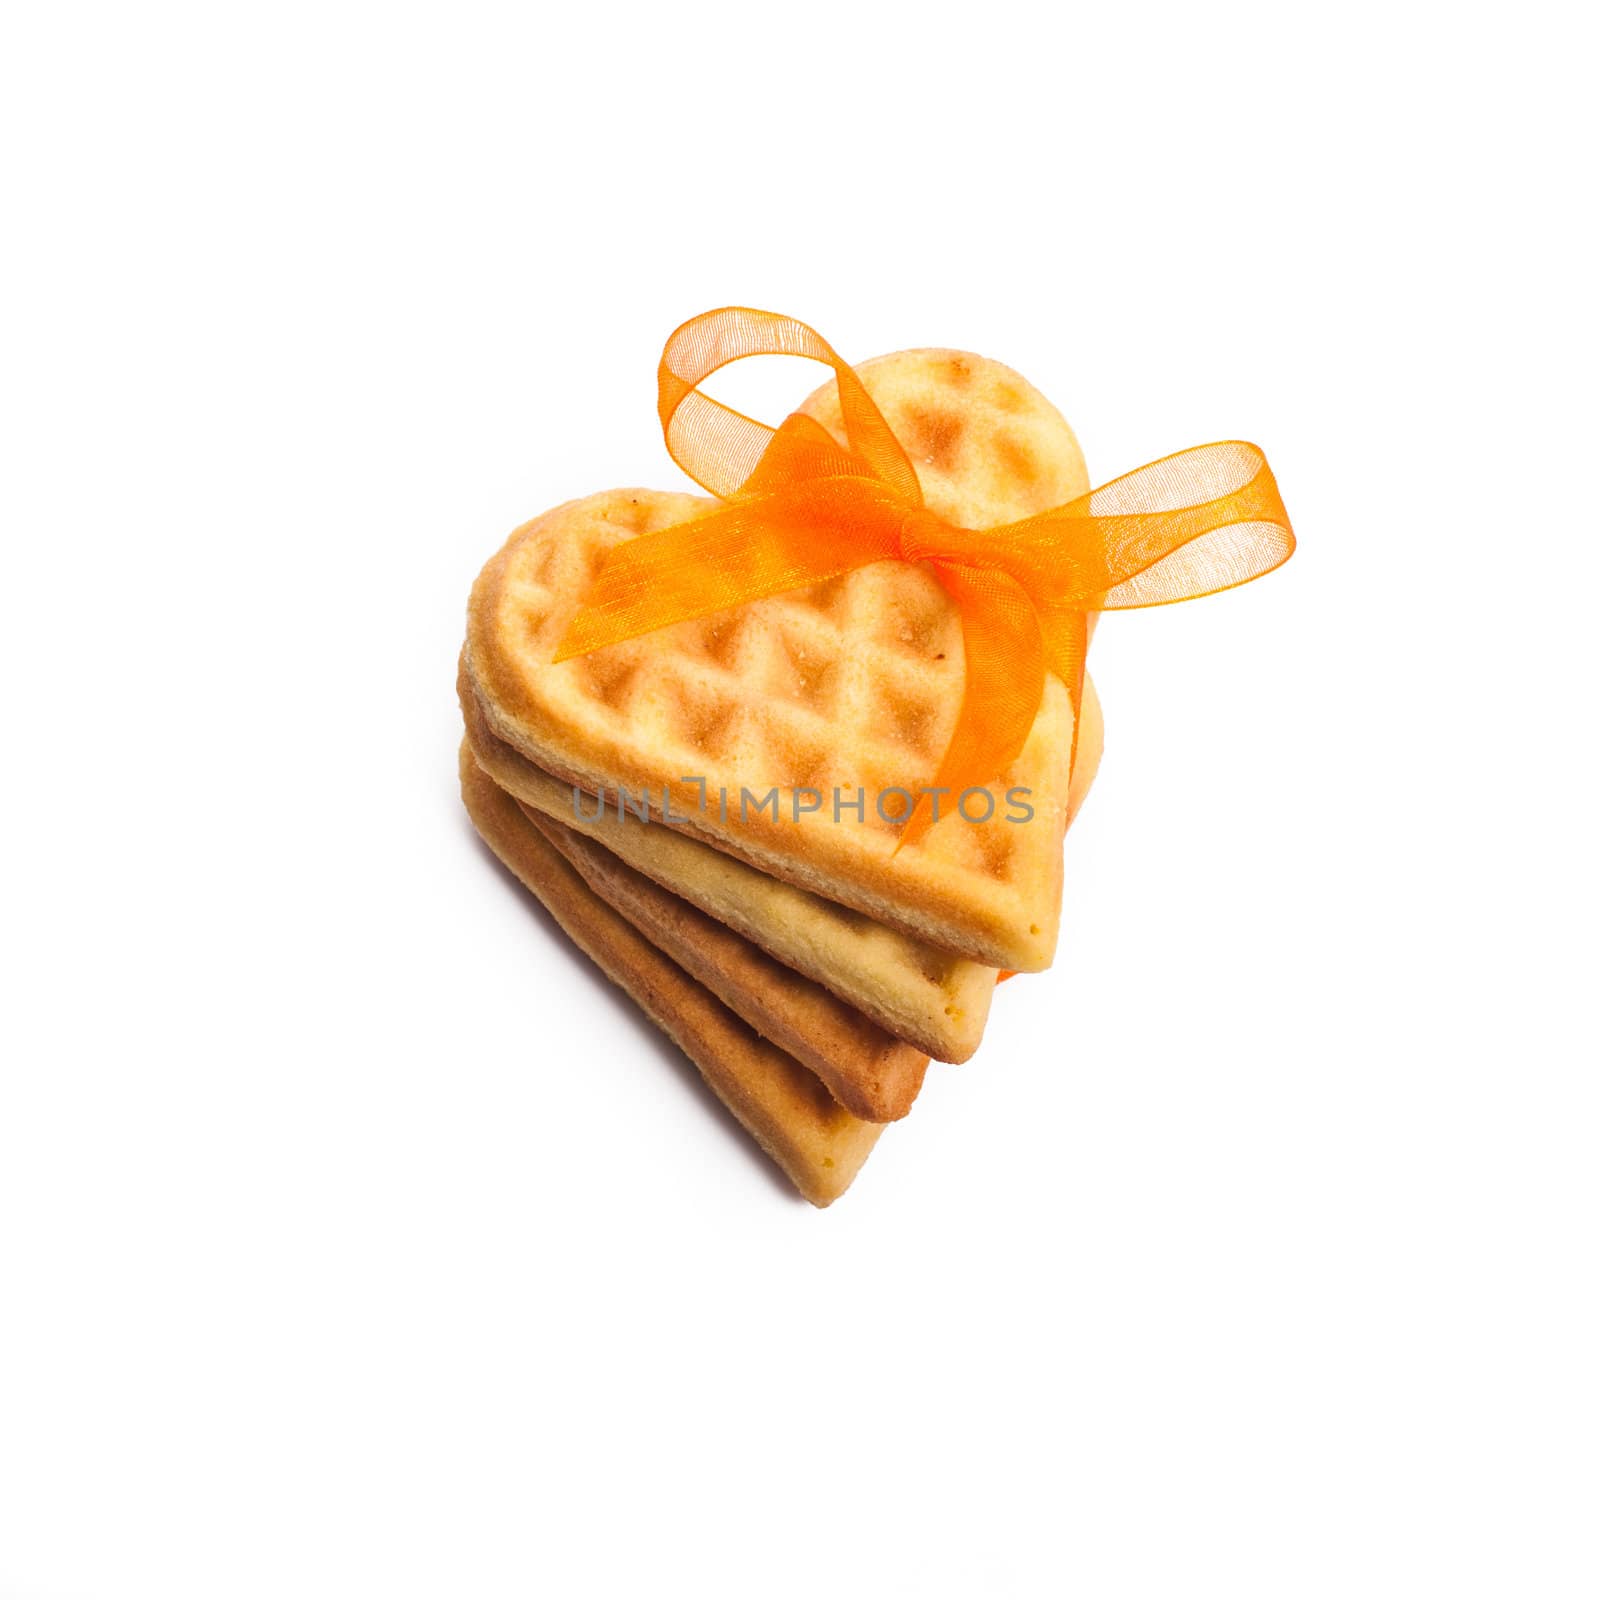 Stack of heart shaped waffles isolated on white background